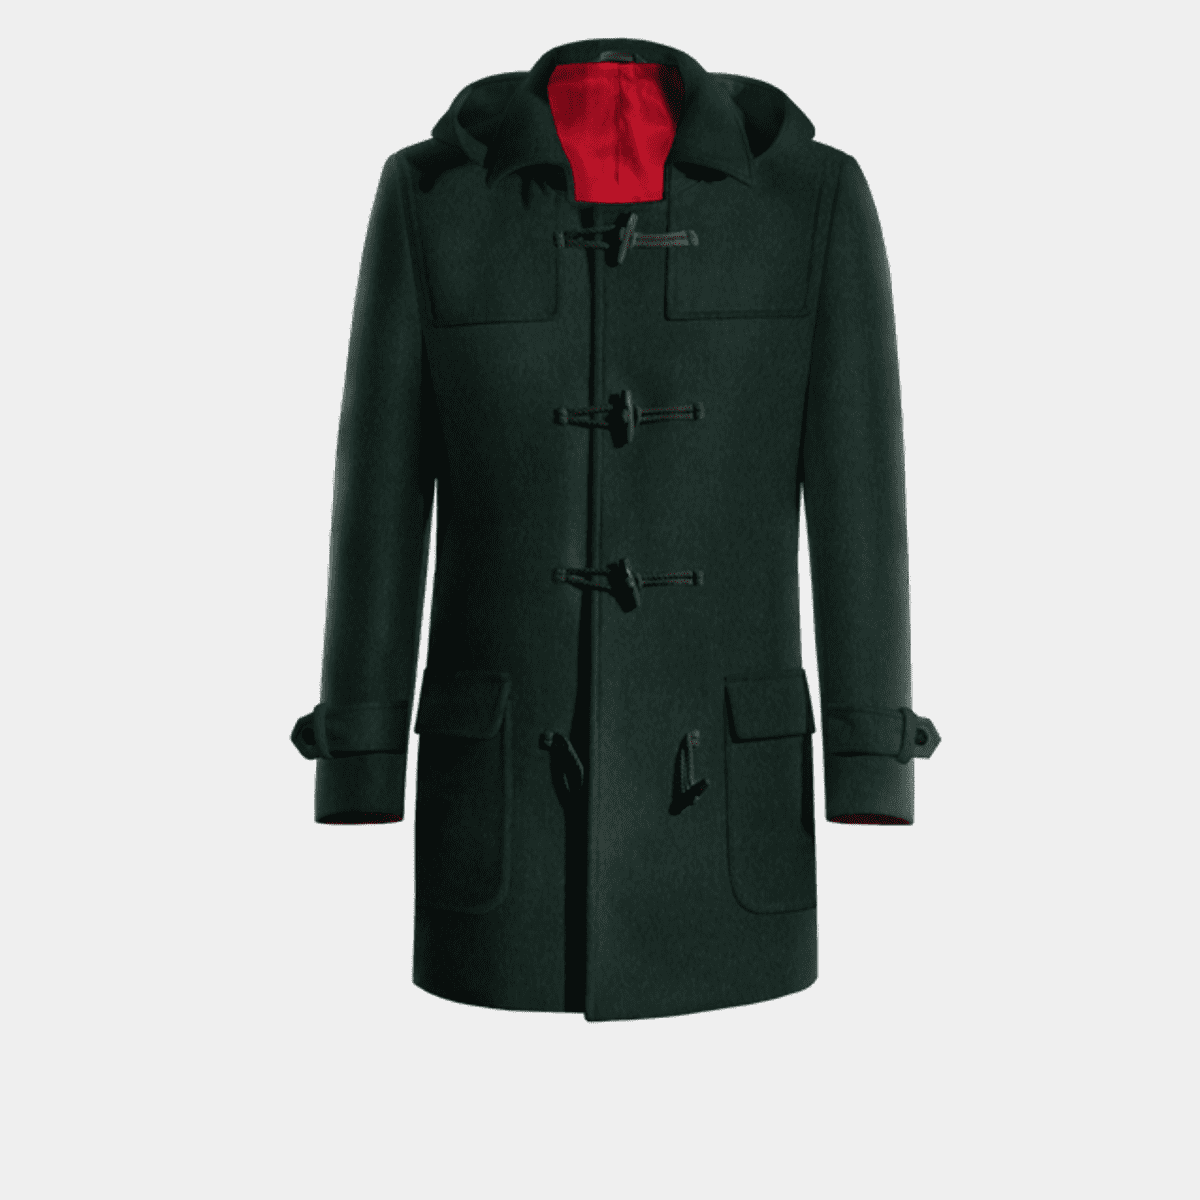 Green Duffle coat with sleeve straps